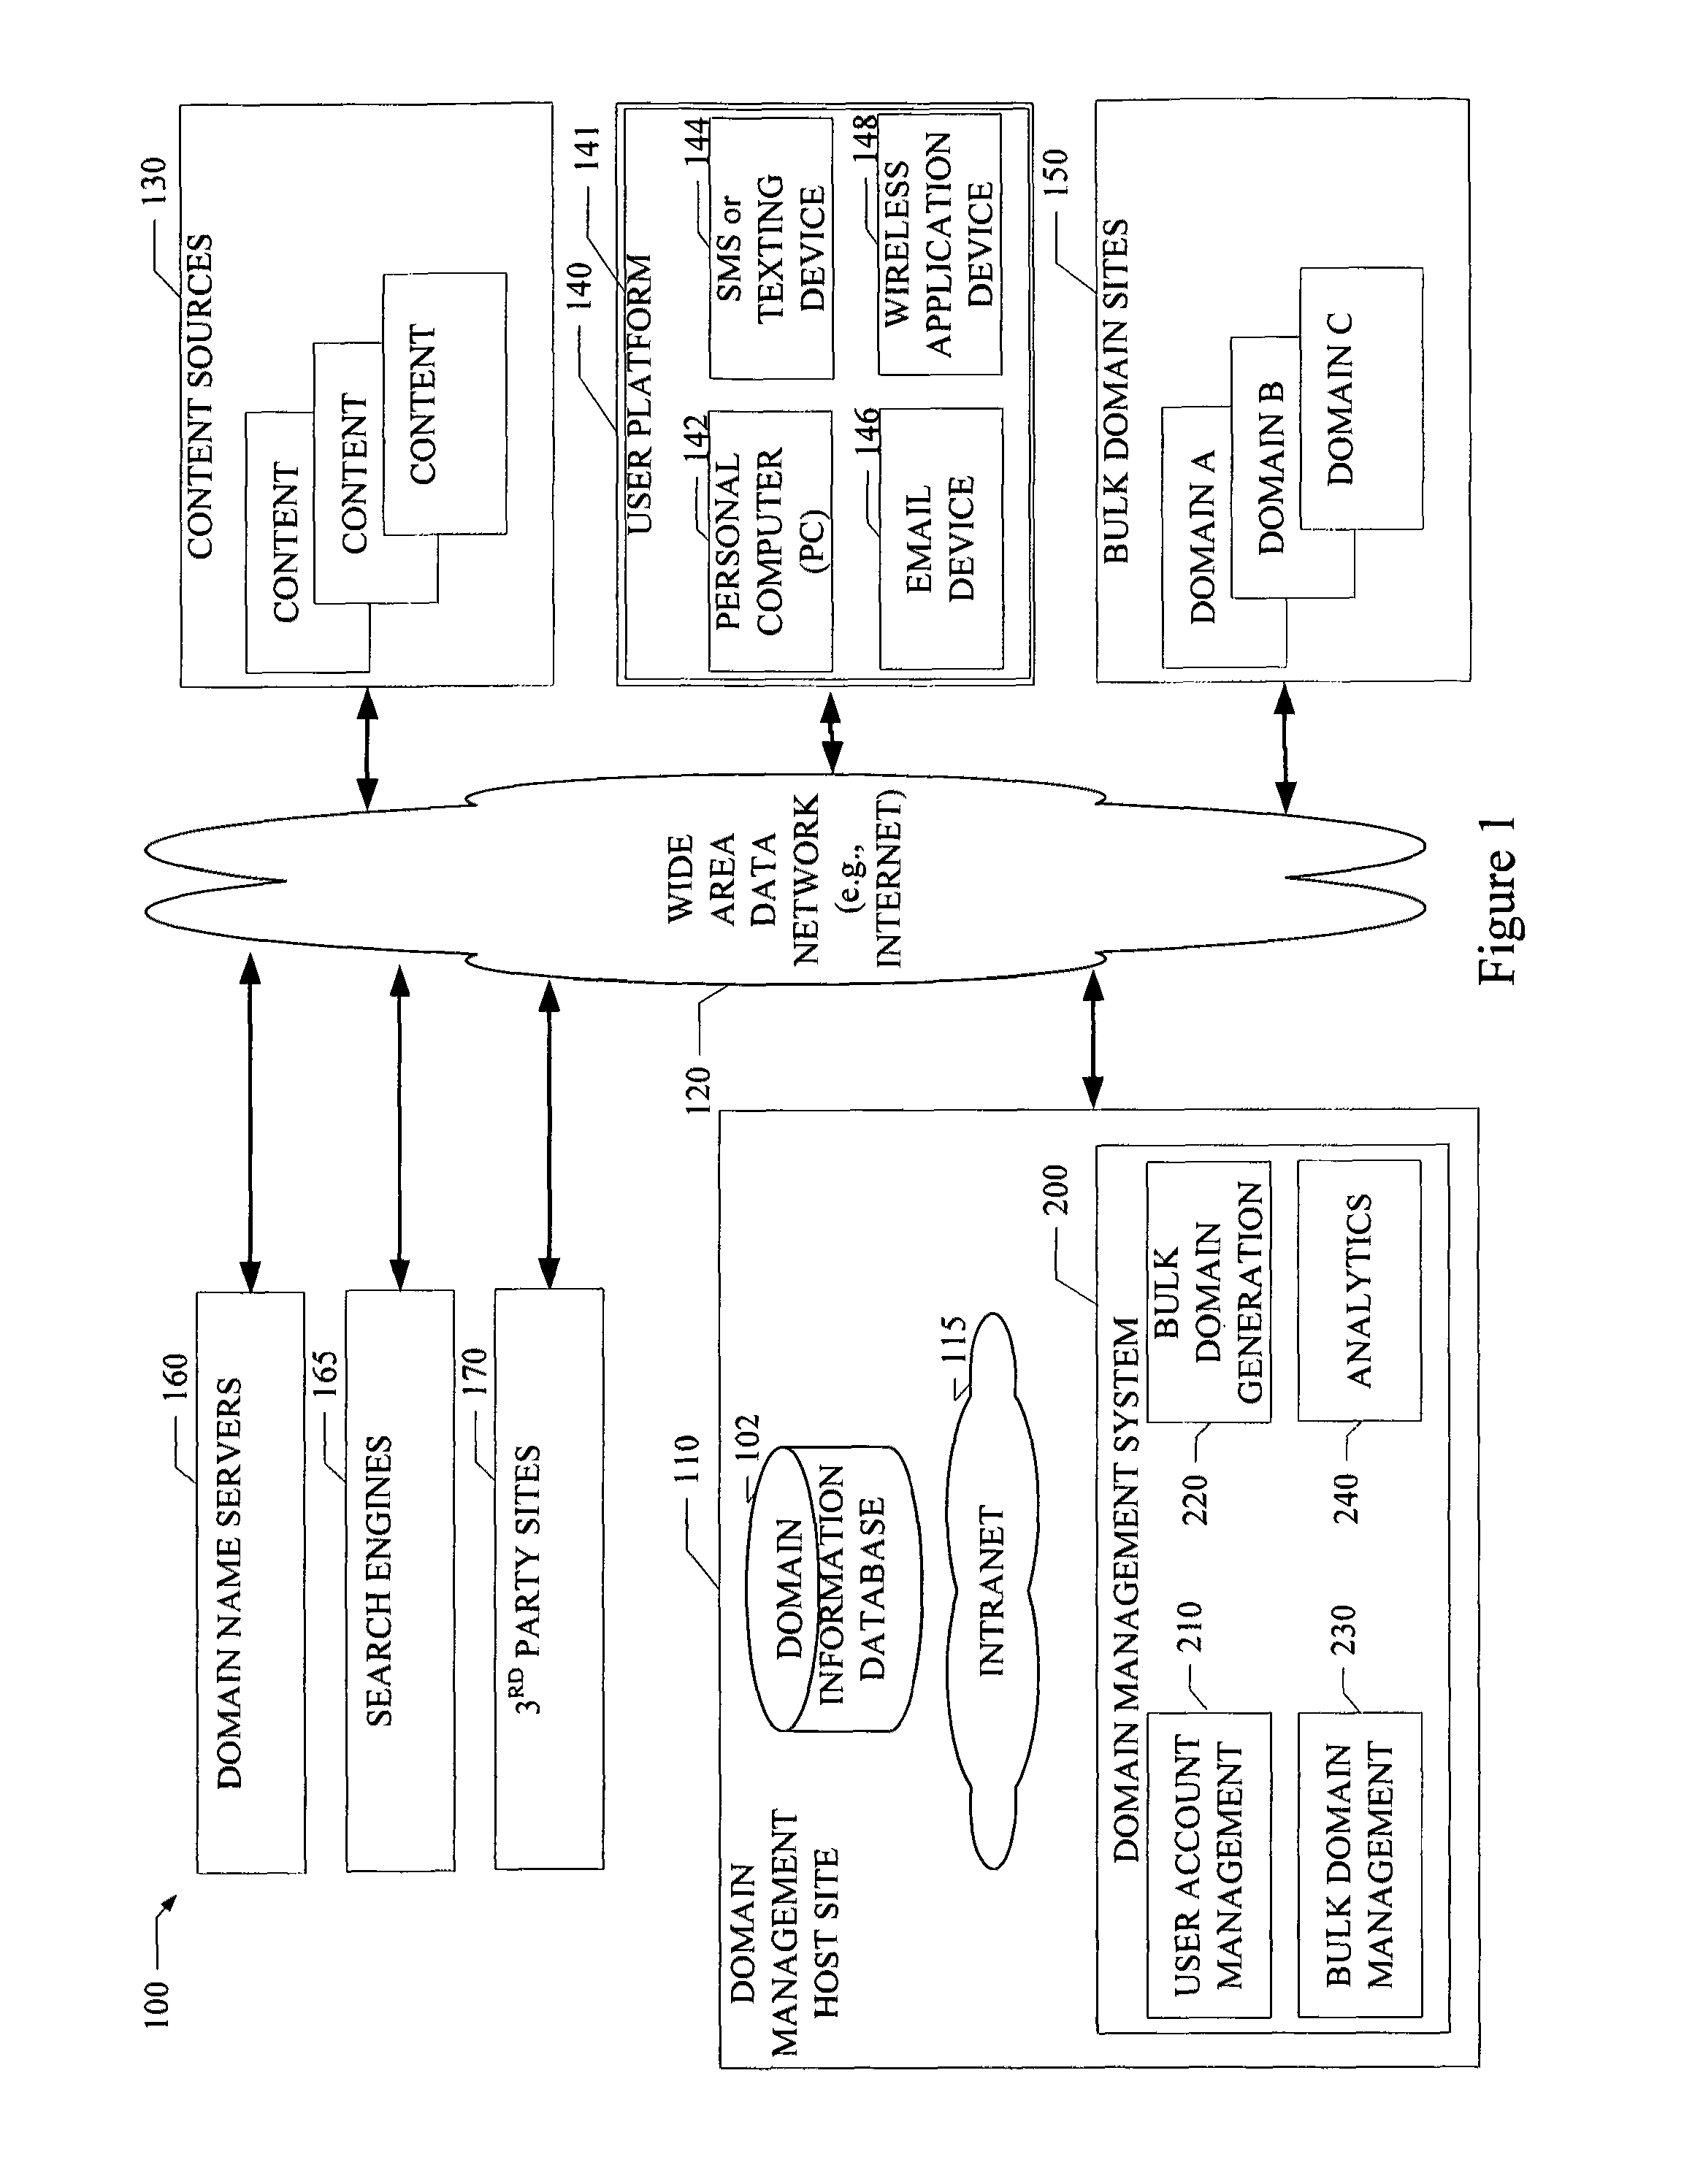 System and method for bulk web domain generation and management